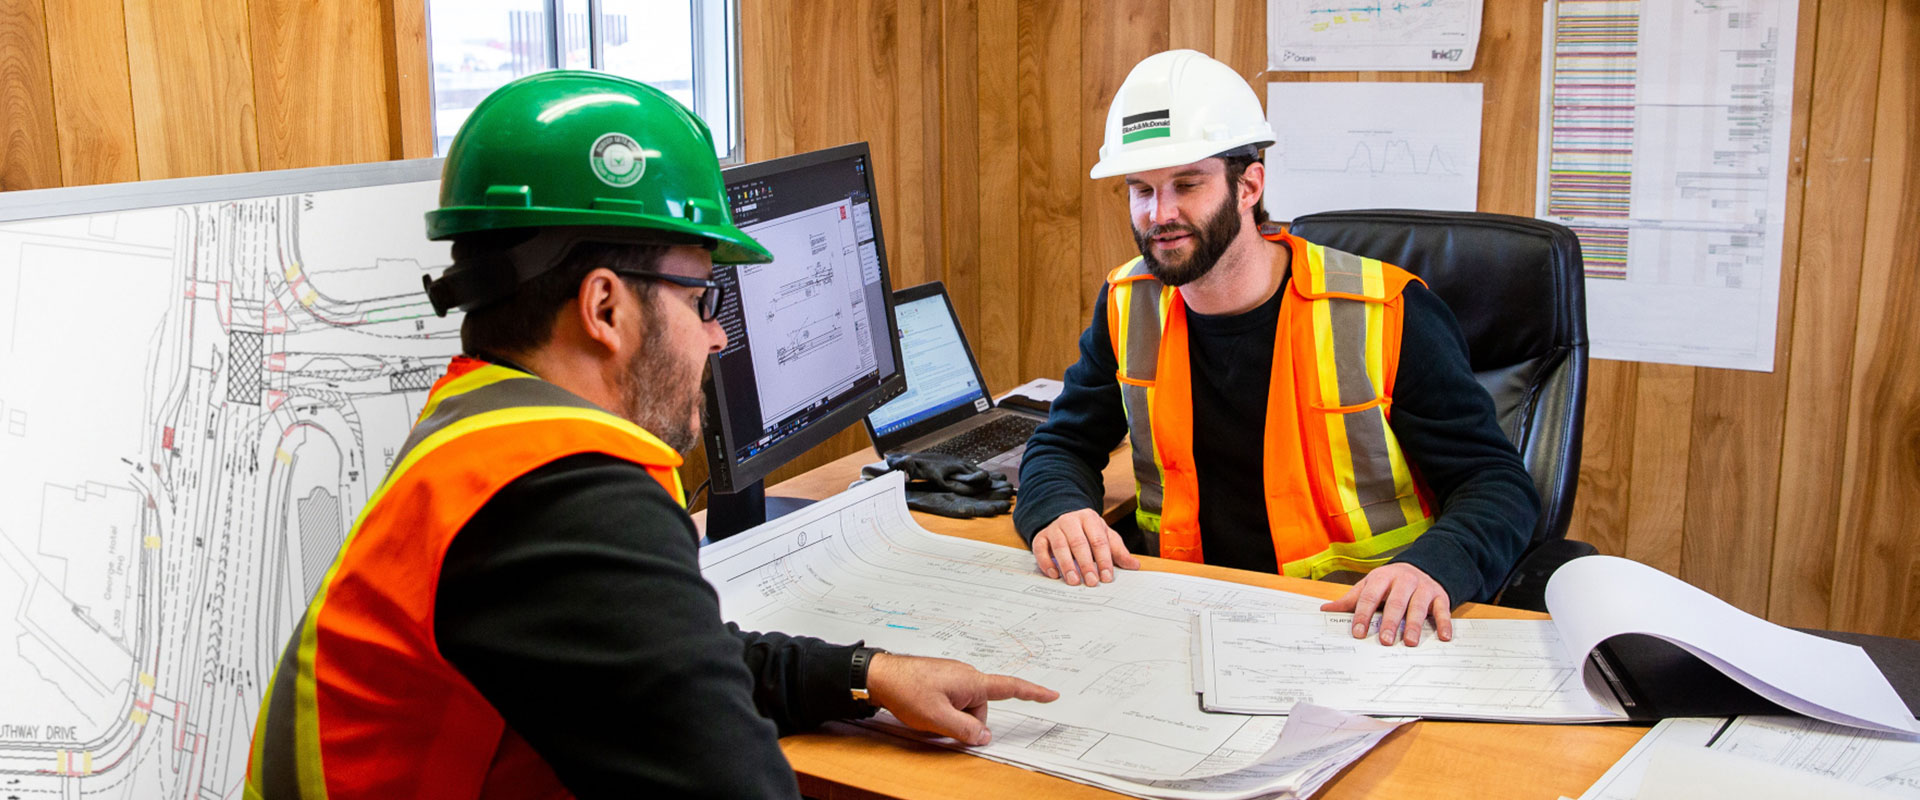 Two B&M employees discussing a construction project in an office environment